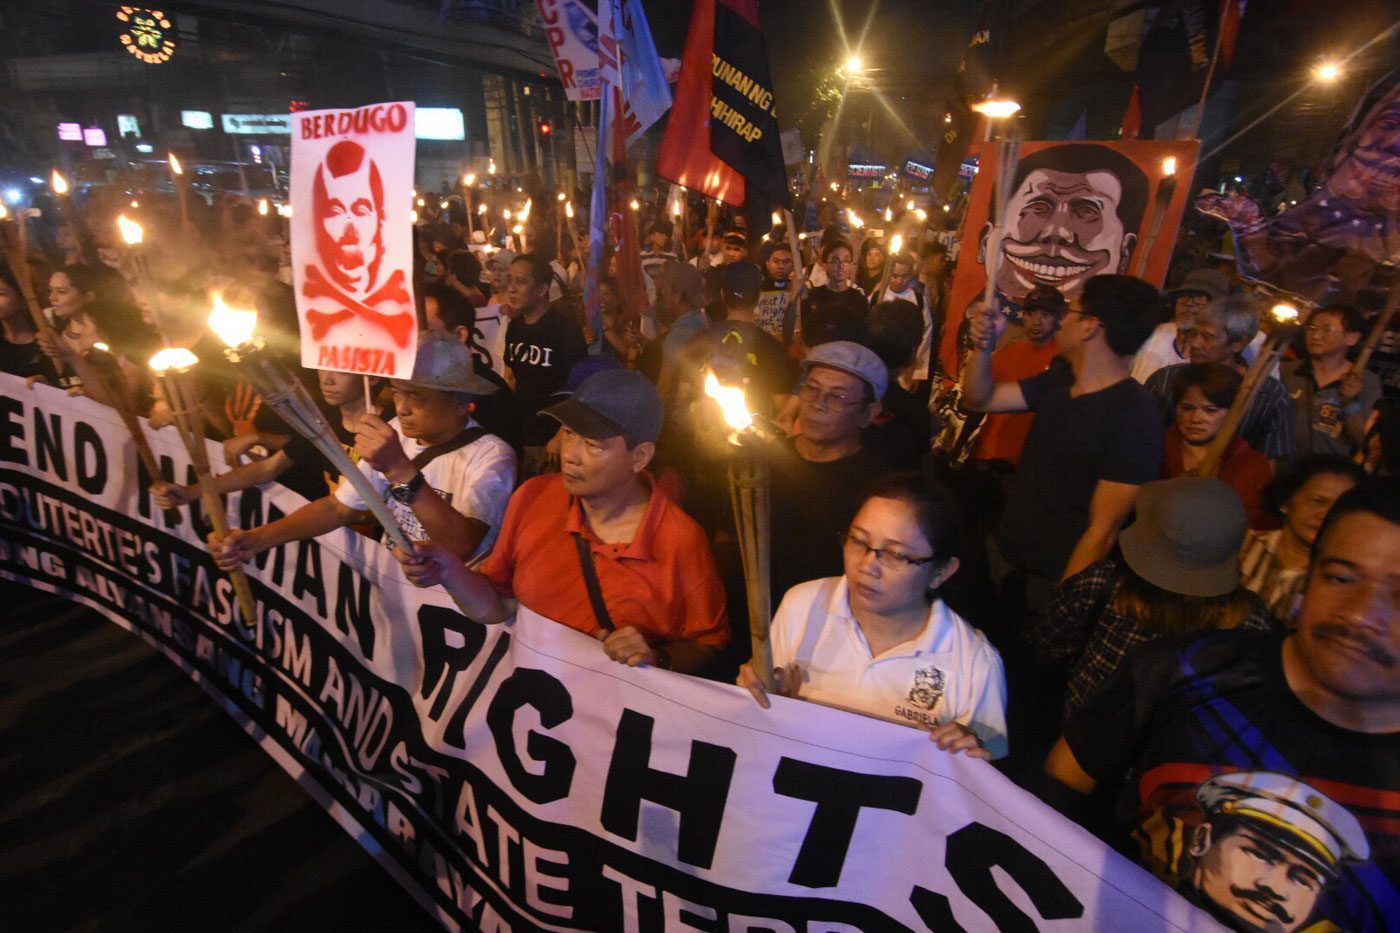 Freedom of expression ‘under siege’ in PH, say human rights groups